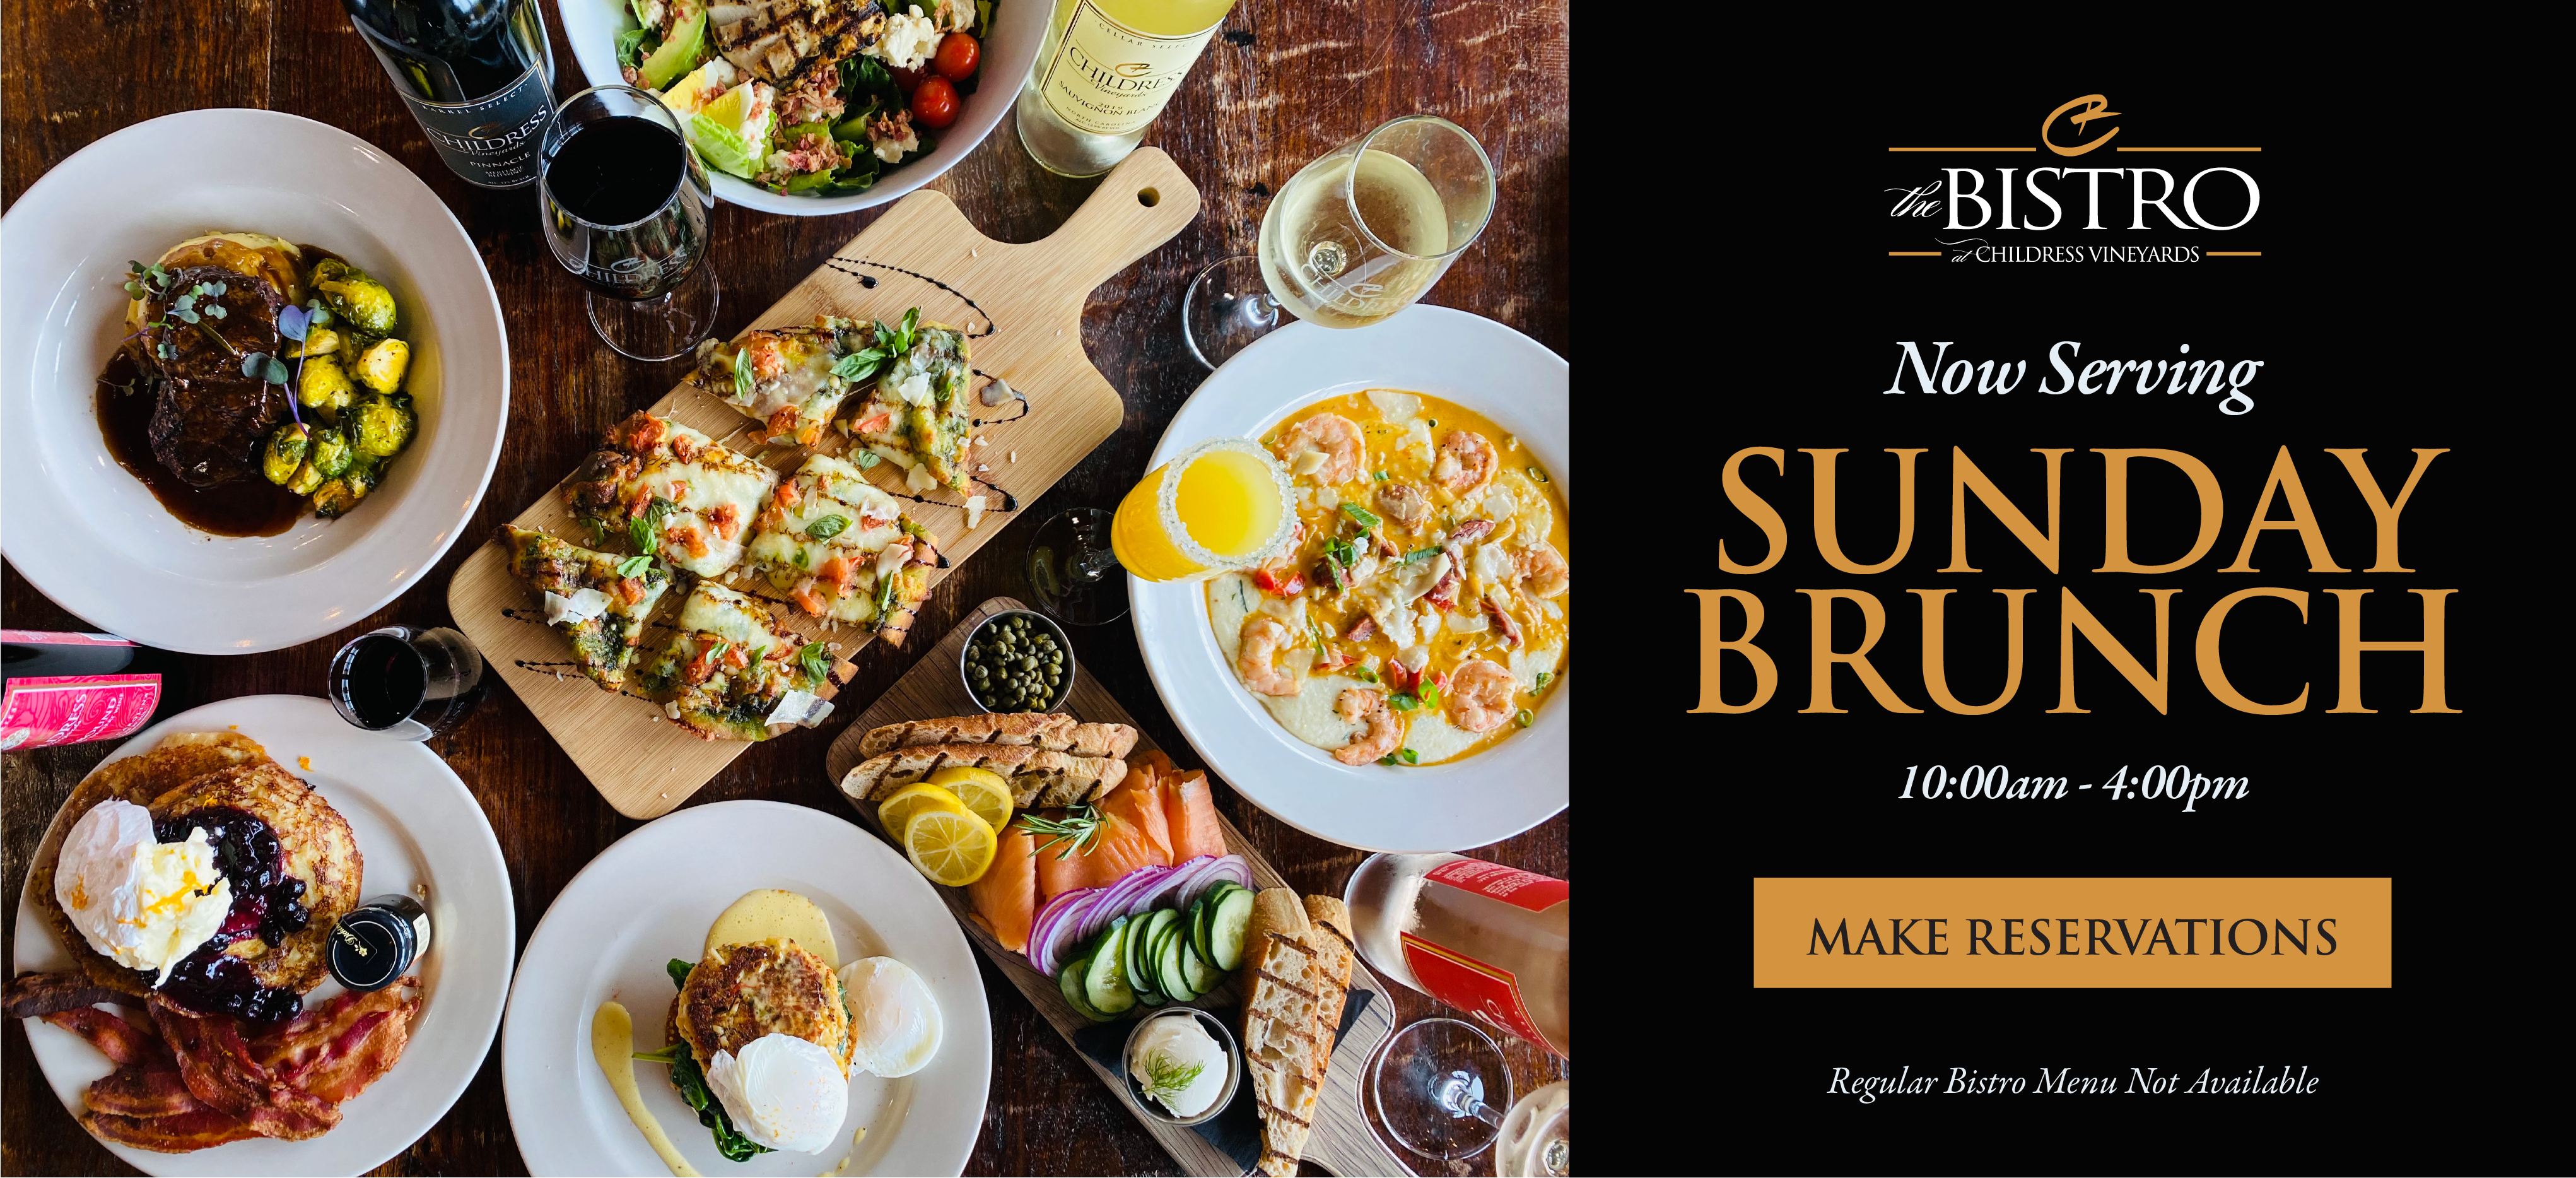 Childress Vineyards and Winery now serving Sunday Brunch at the Bistro